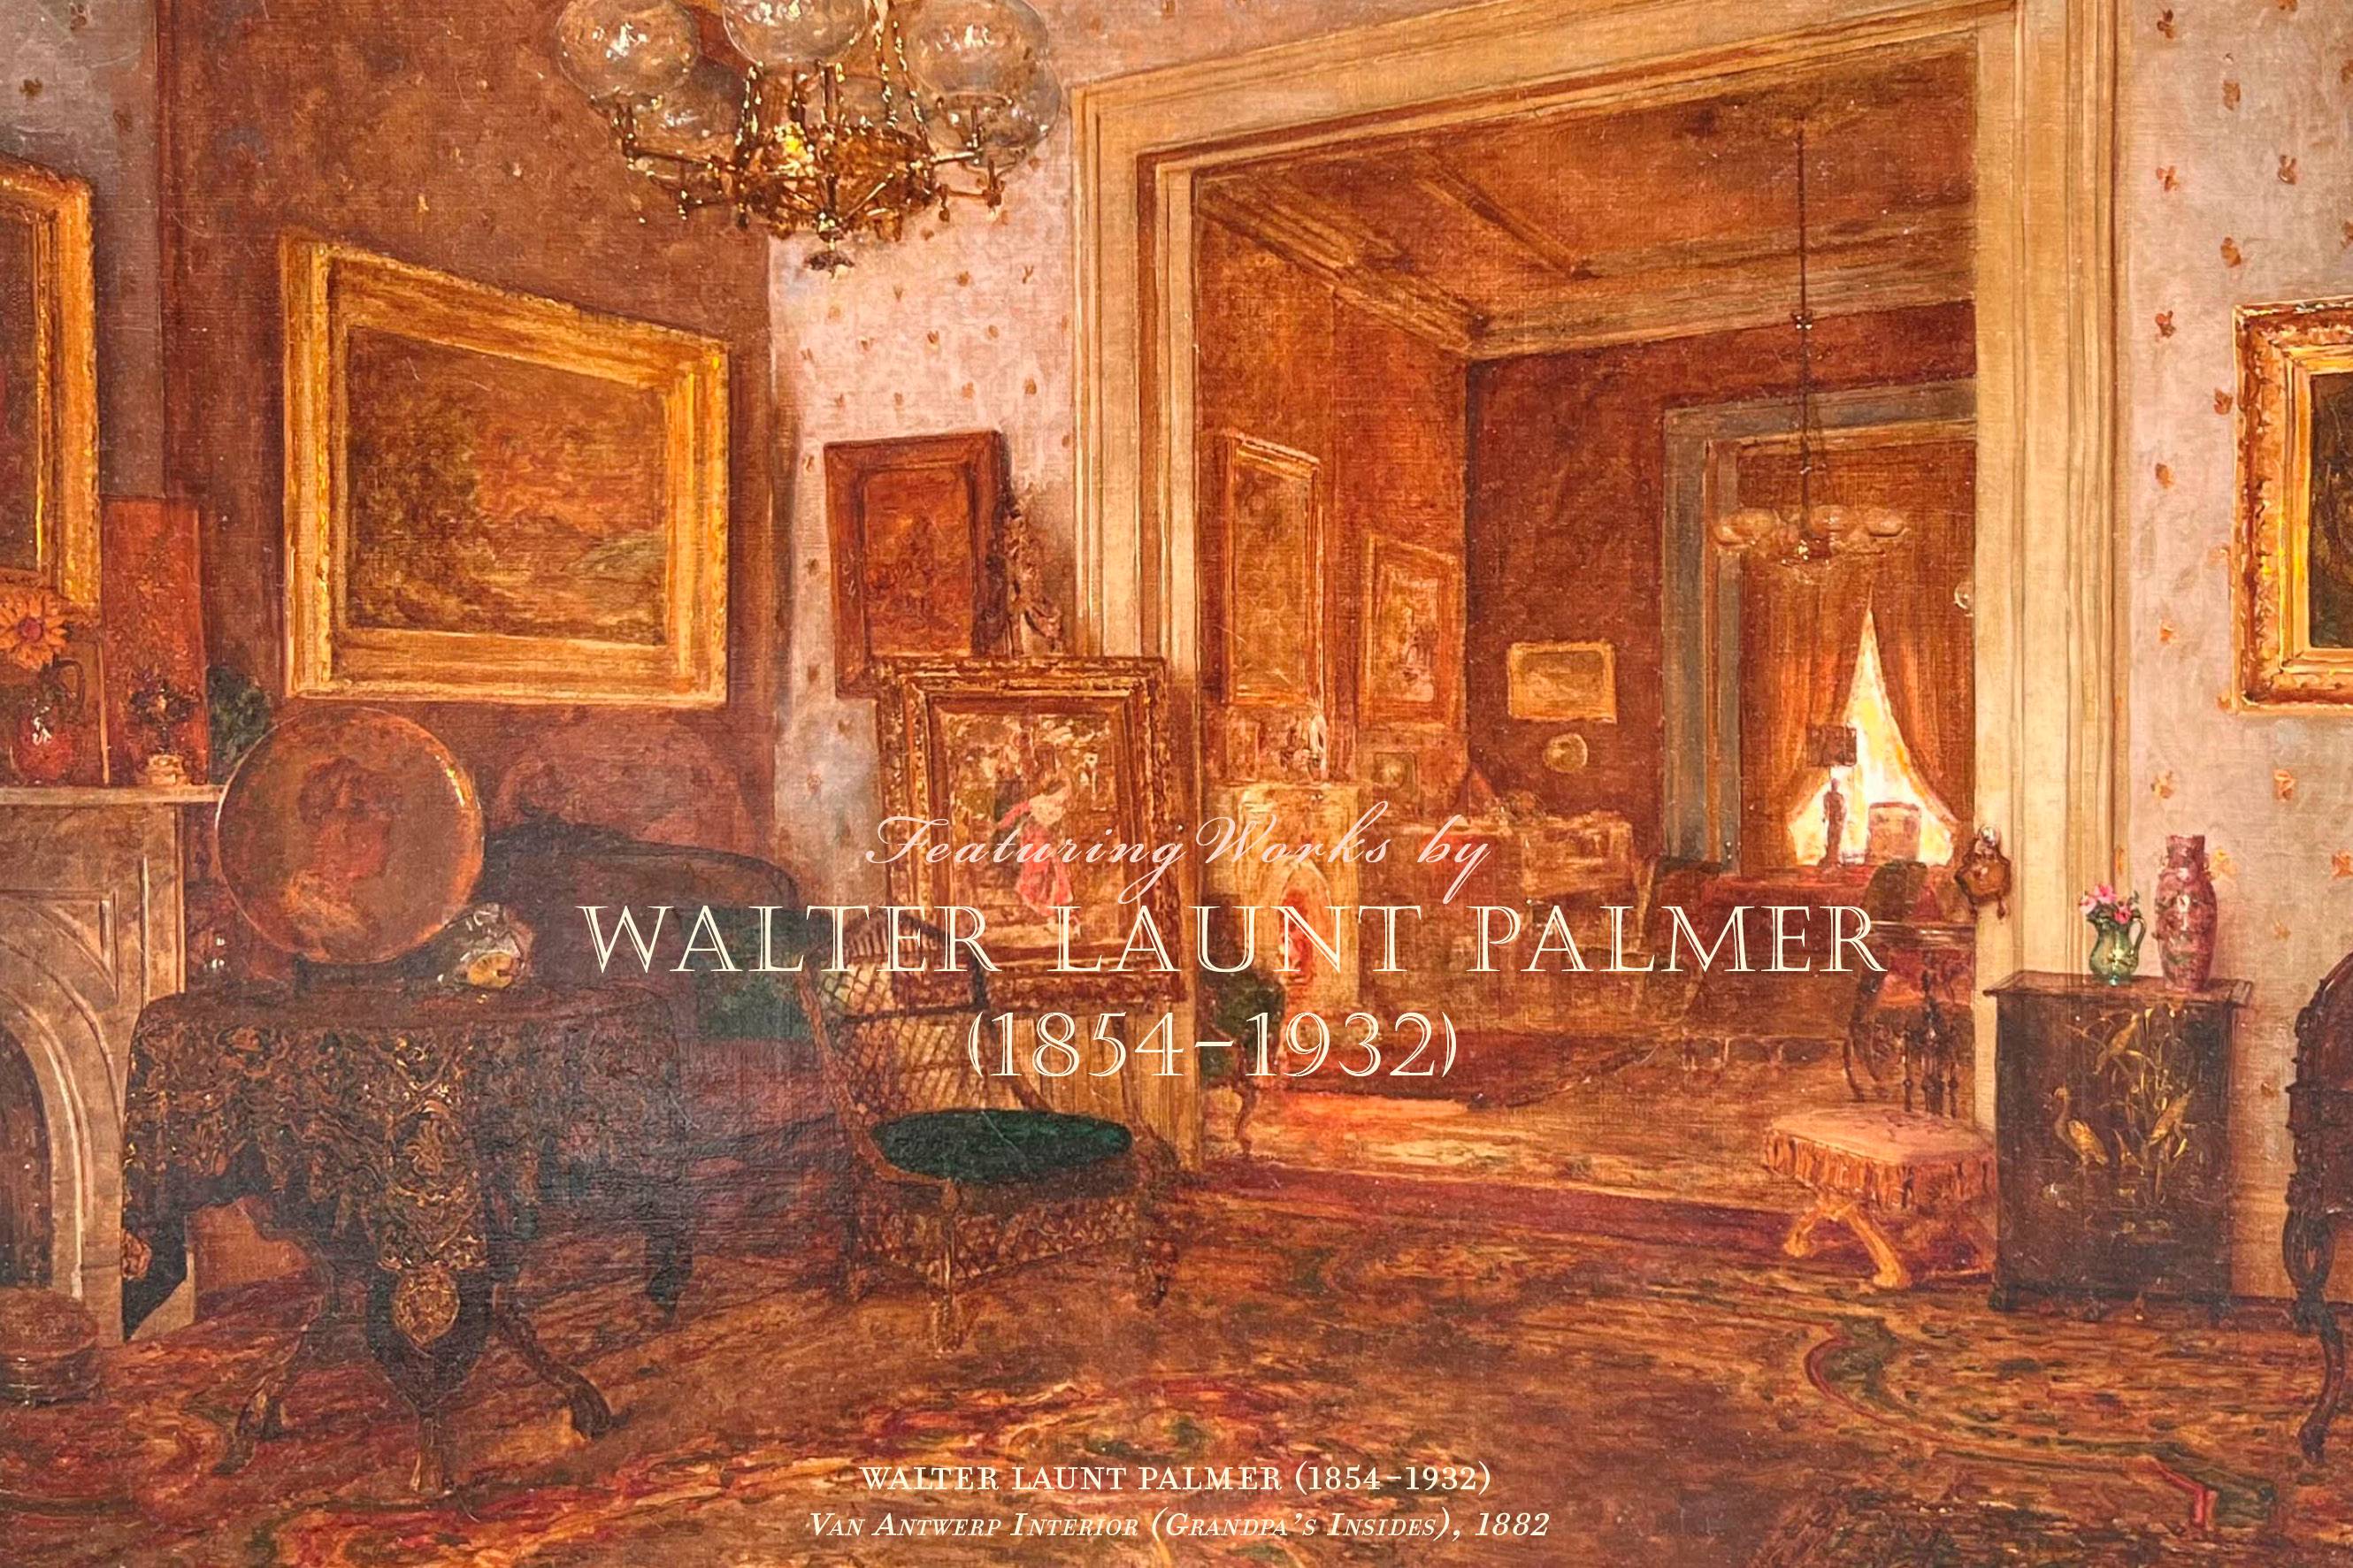 Feauturing Works by Walter Launt Palmer 